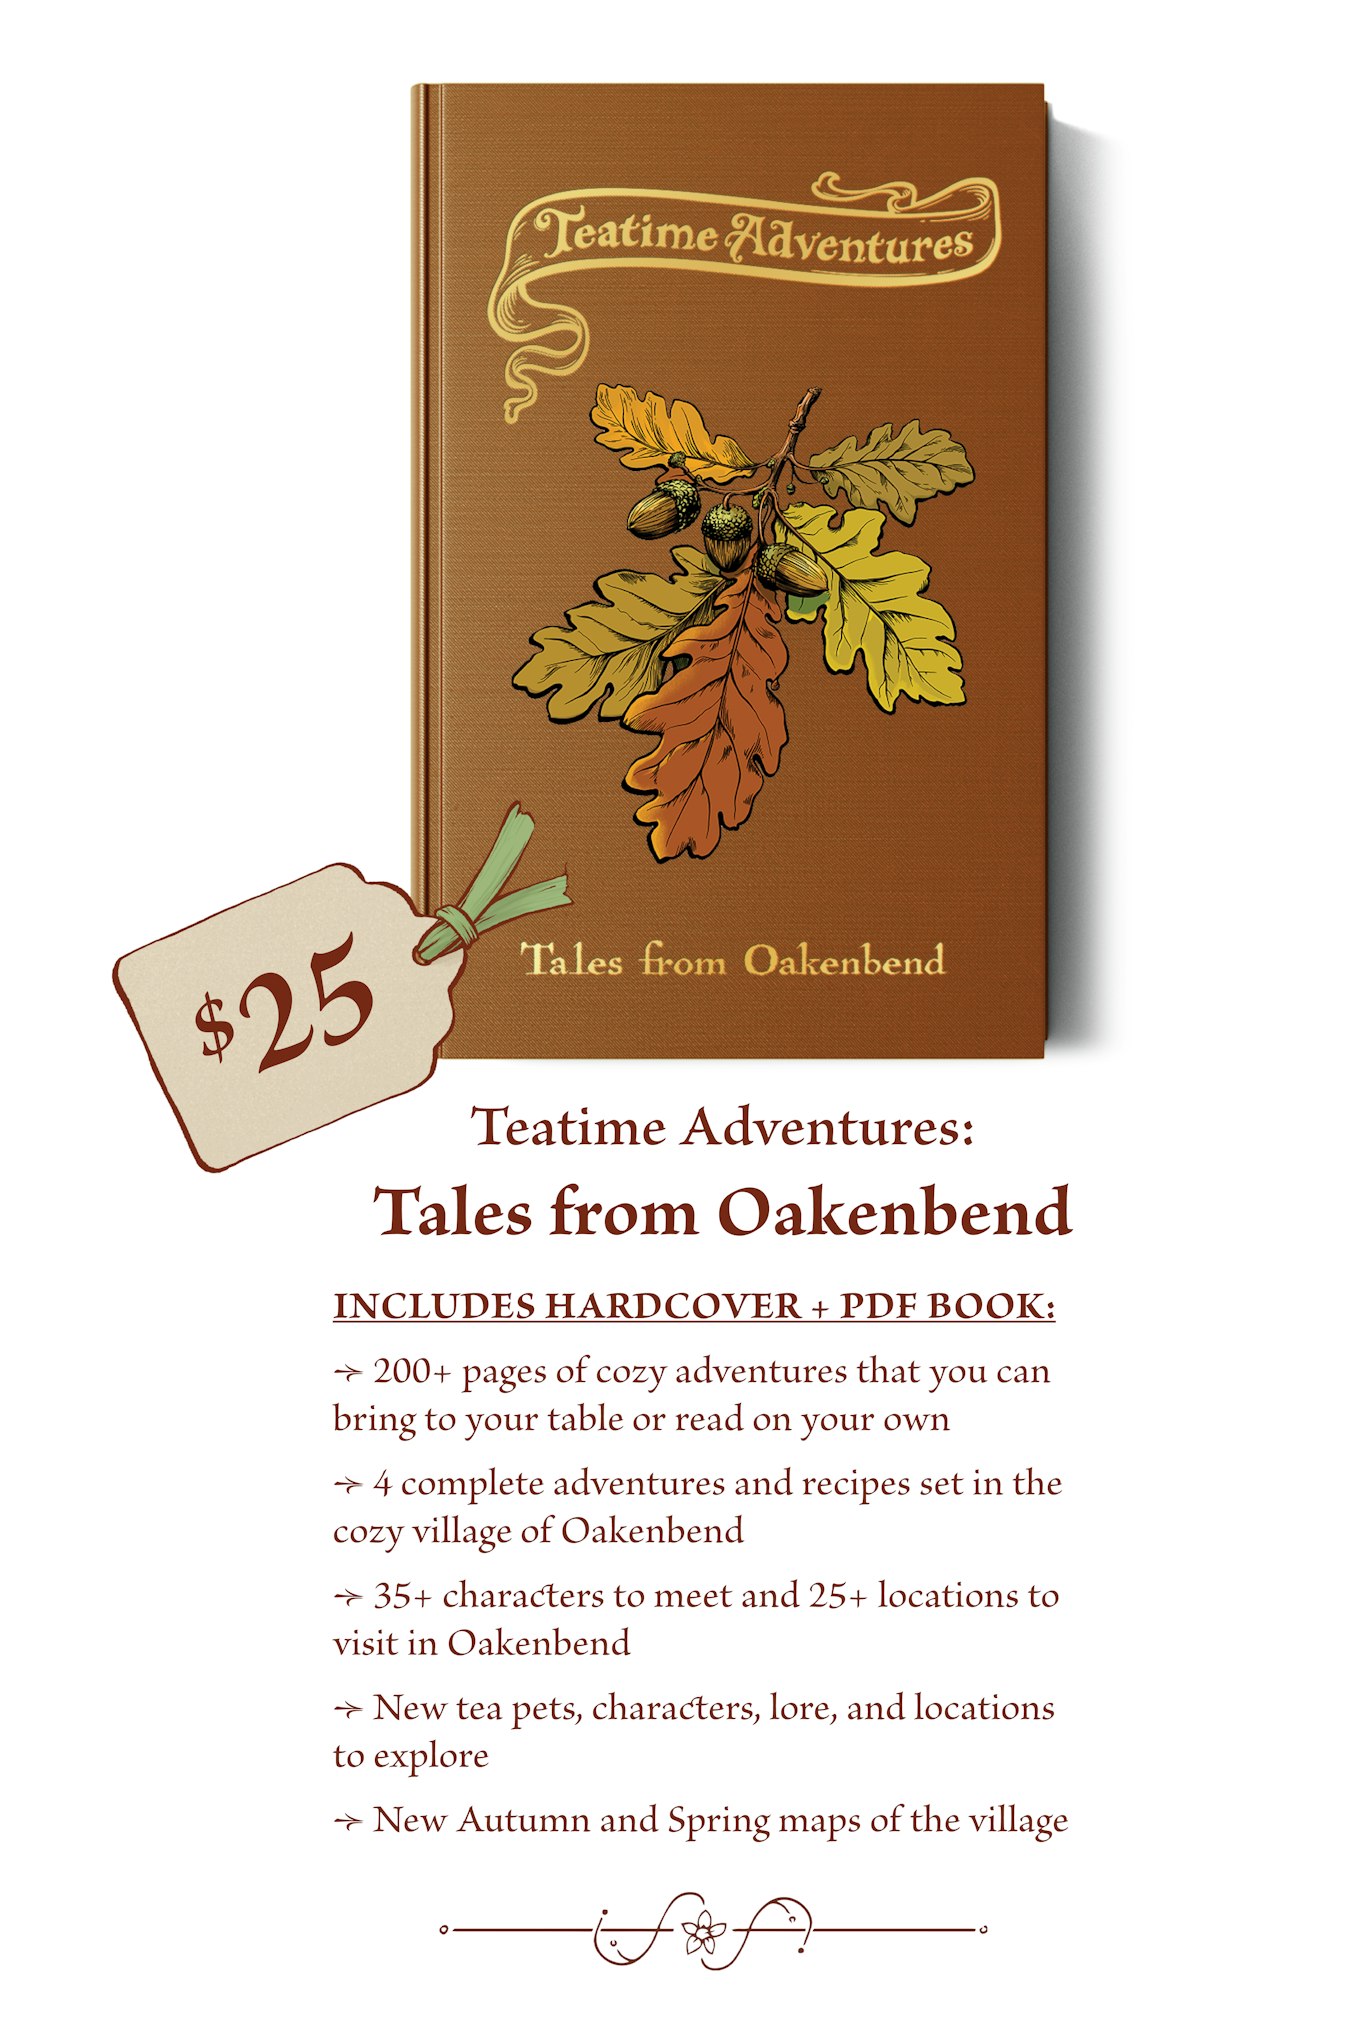 $25 - The Teatime Adventures: Tales from Oakenbend campaign book includes: 200+ pages of cozy adventures that you can bring to your table or read on your own. 4 complete adventures and recipes set in the cozy village of Oakenbend. 35+ characters to meet and 25+ locations to visit in Oakenbend. New tea pets, characters, lore, and locations to explore New Autumn and Spring maps of the village 